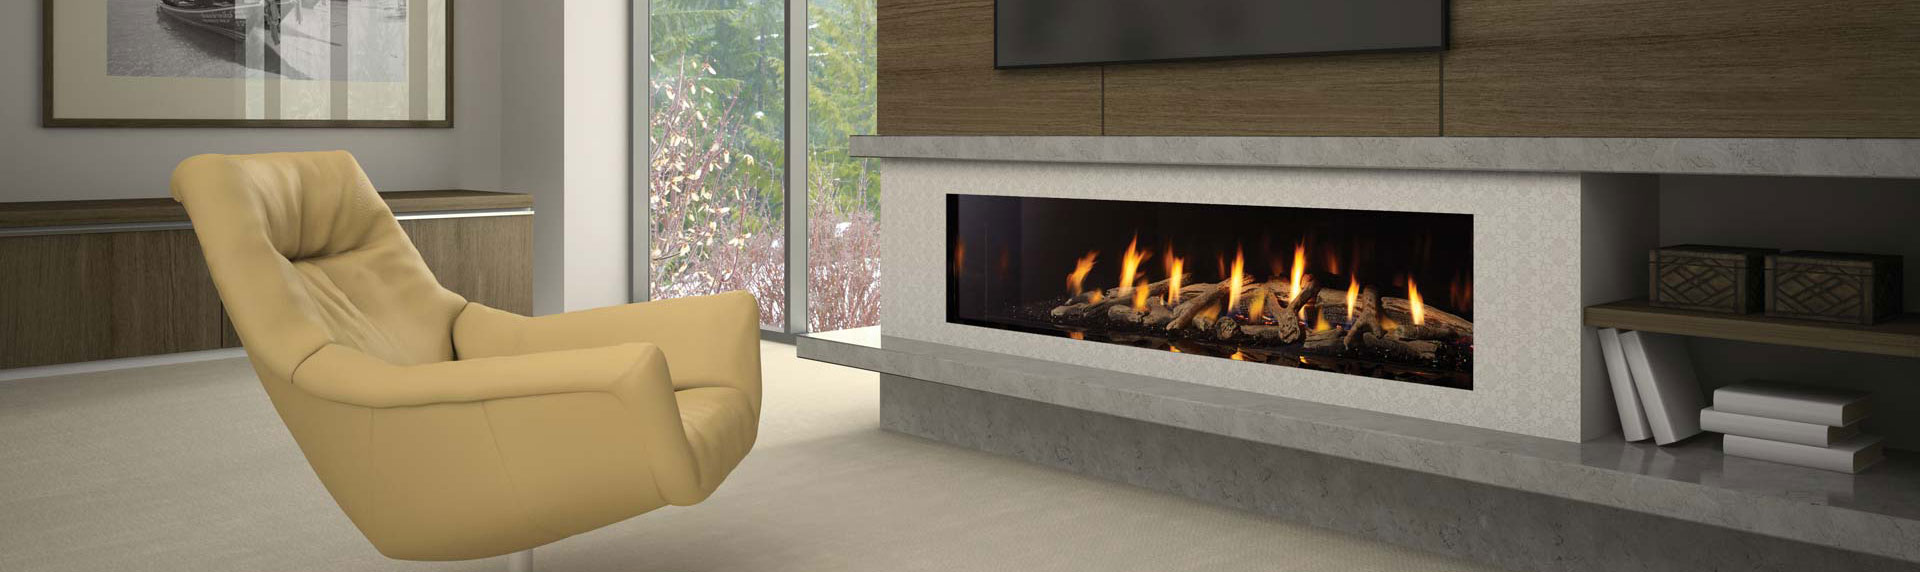 Modern Gas Fireplace with designer surround and marble hearth and mantle